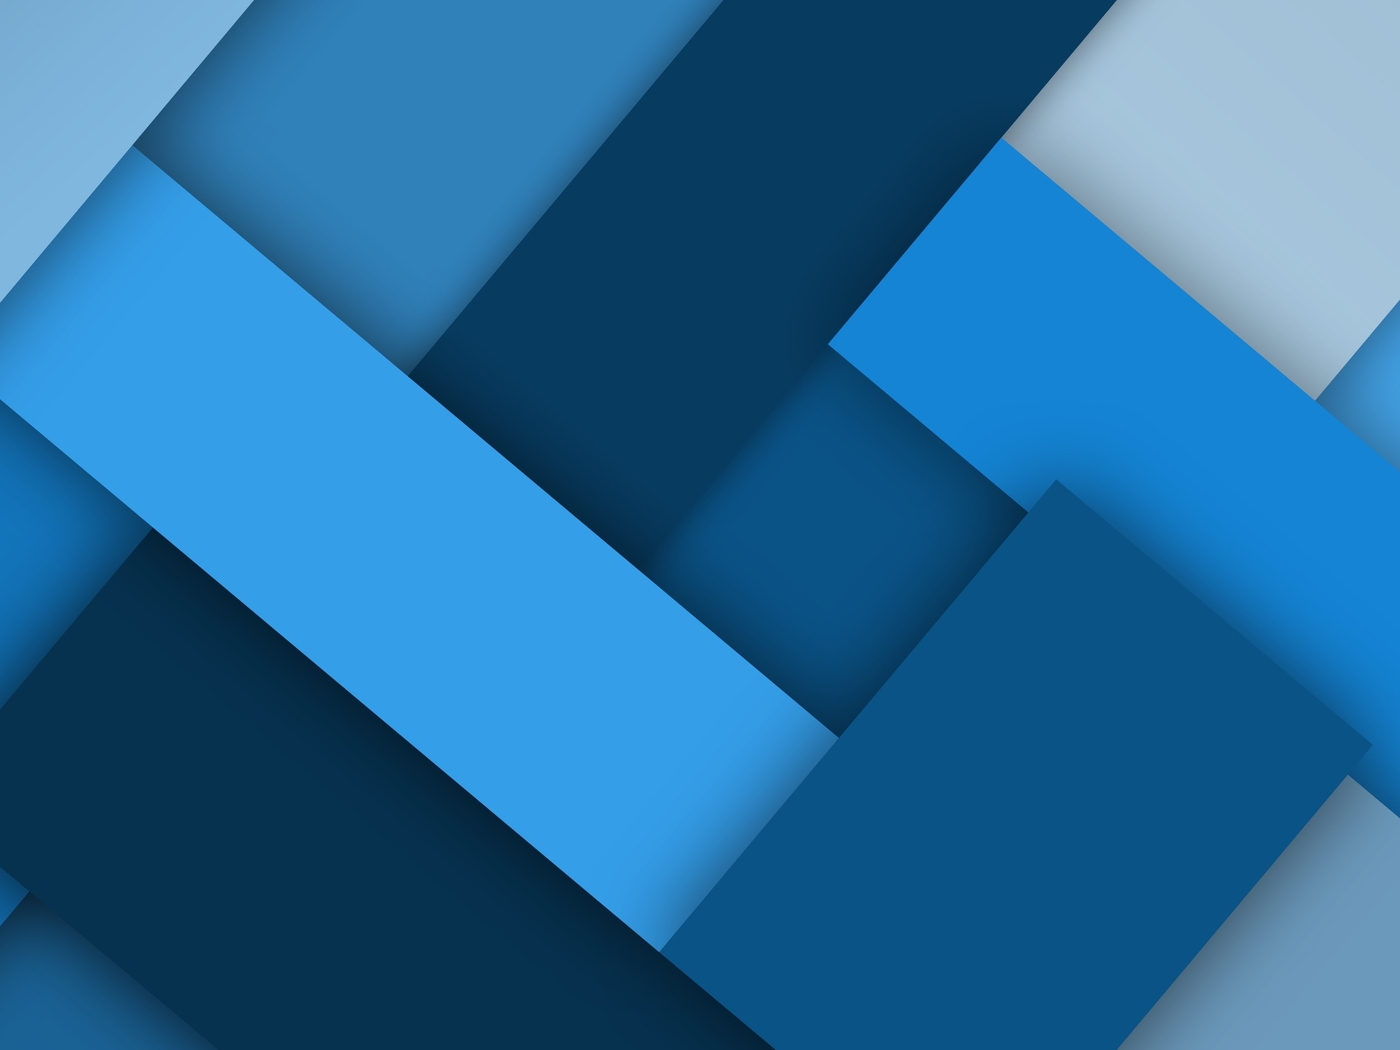 Image: Rectangles, blue, shades, layers